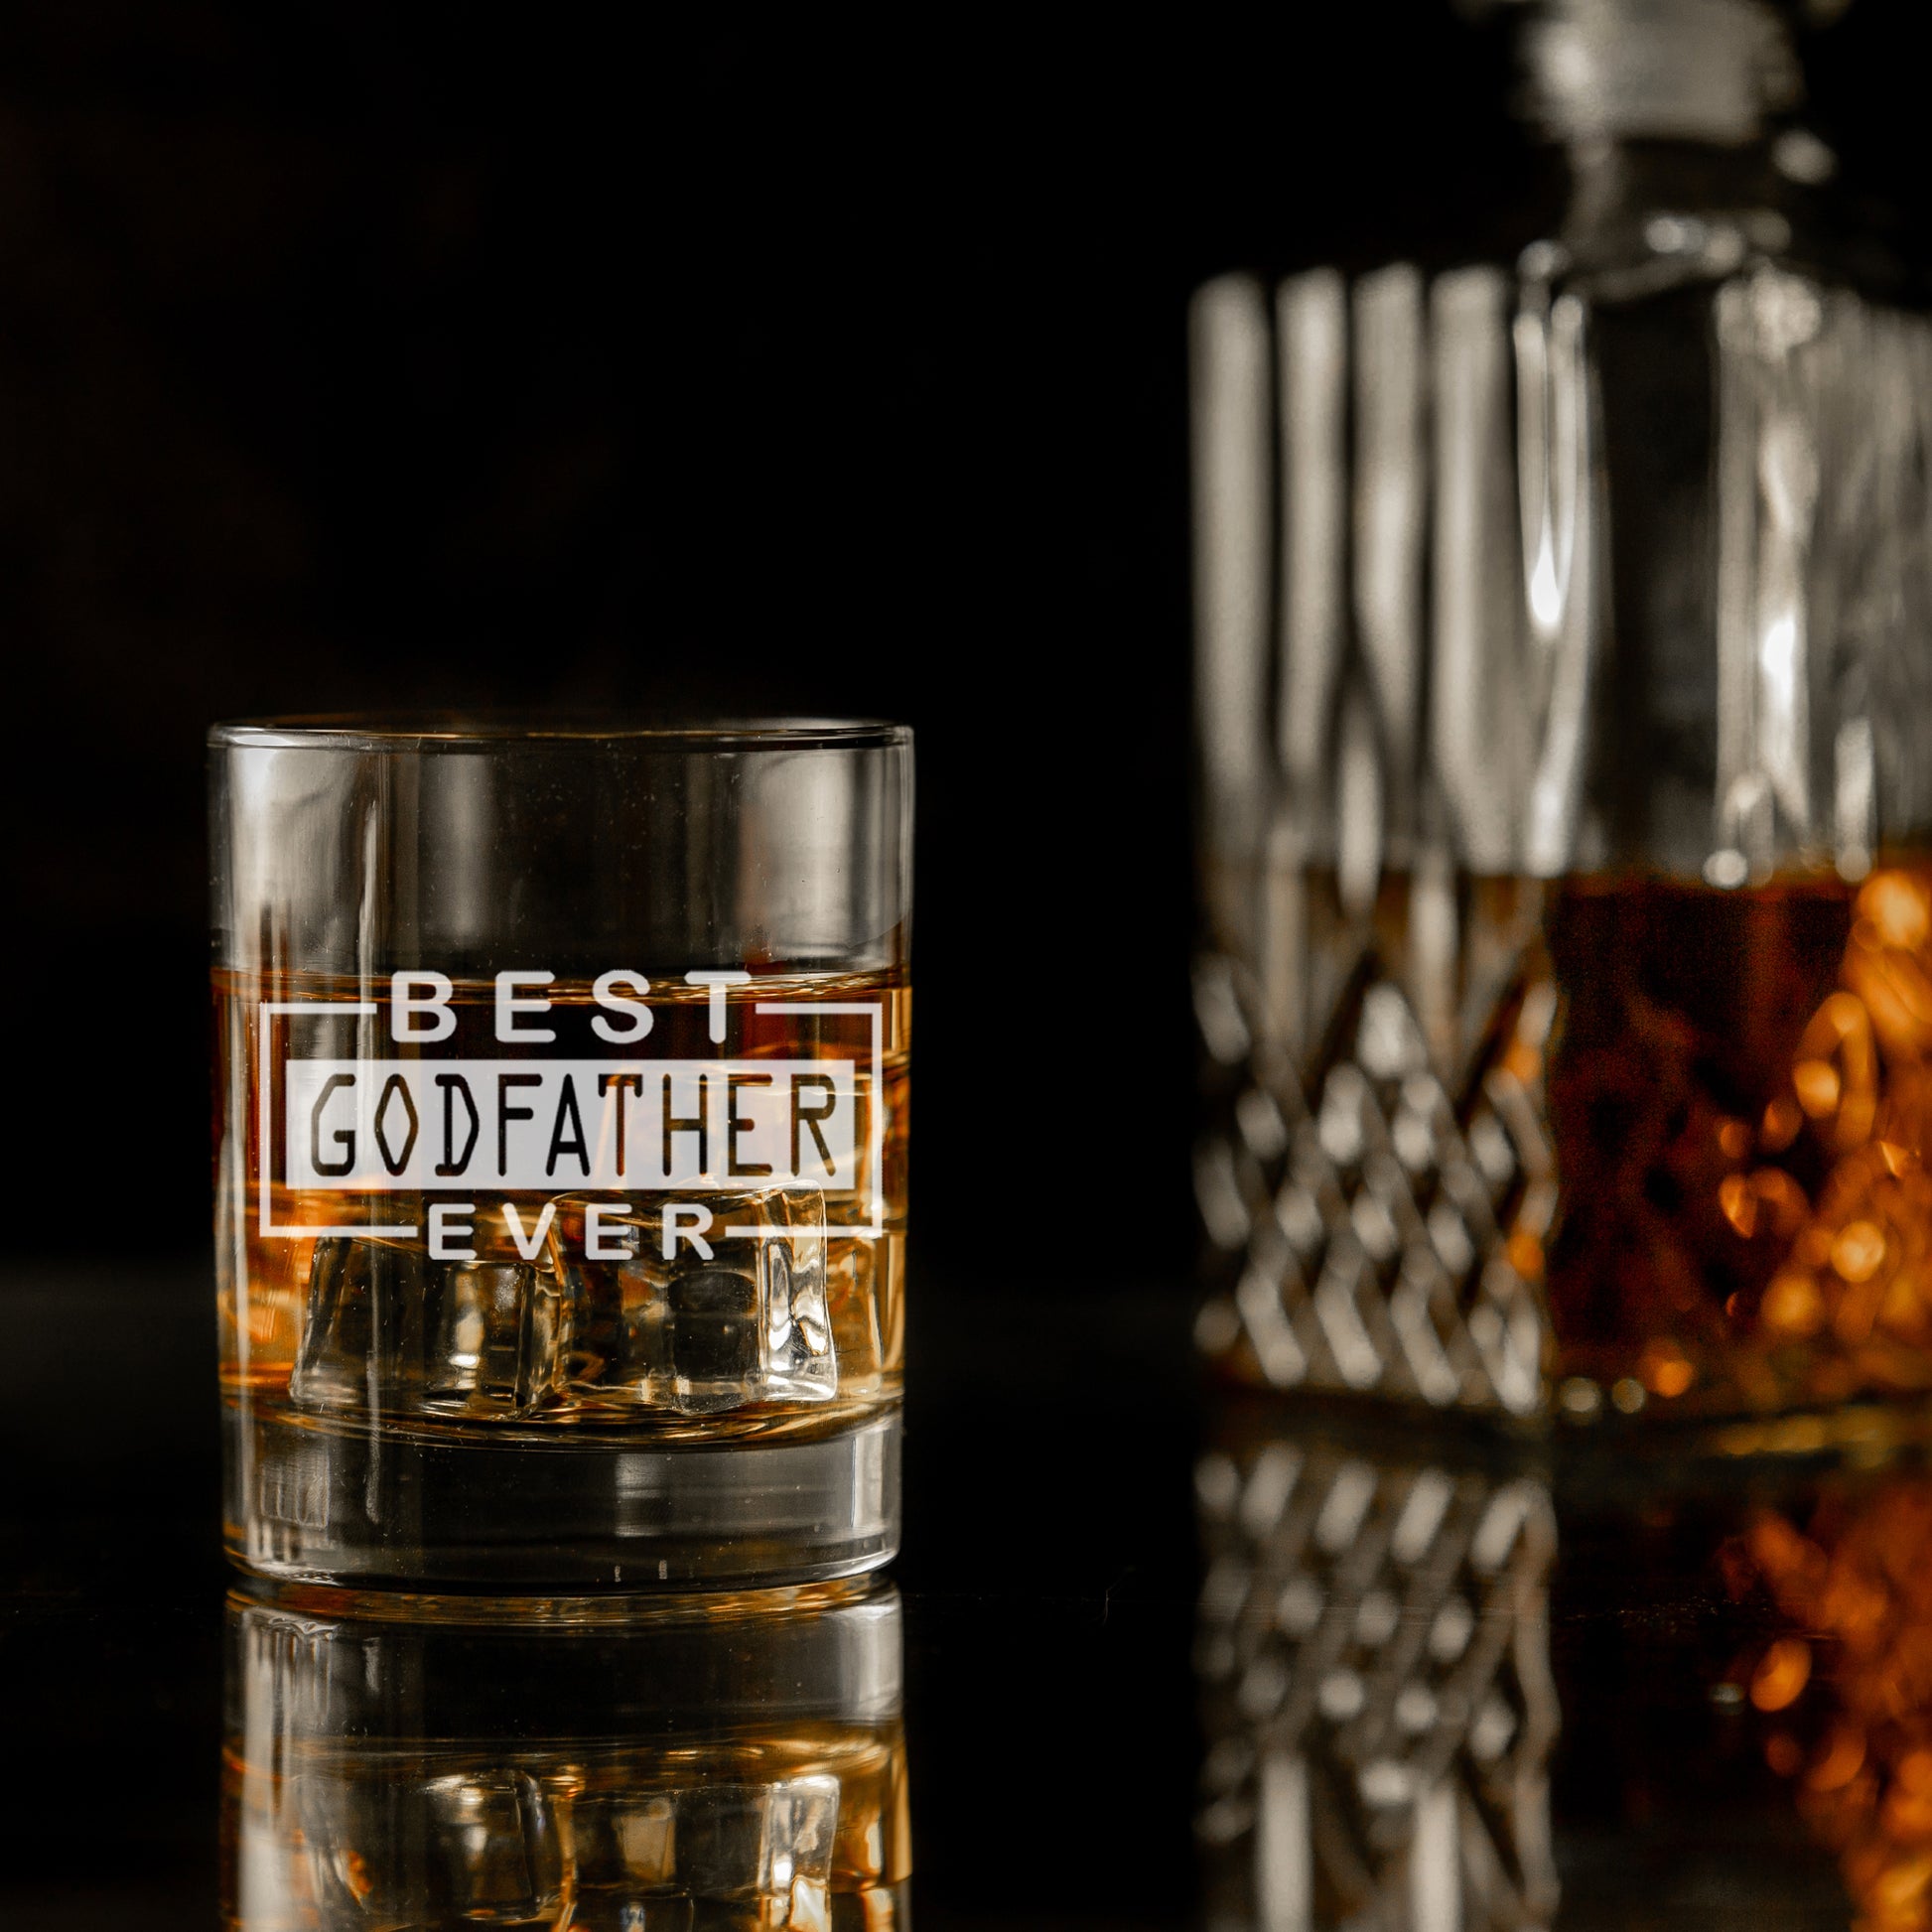 Best Godfather Ever Engraved Whisky Glass and/or Coaster Gift  - Always Looking Good -   